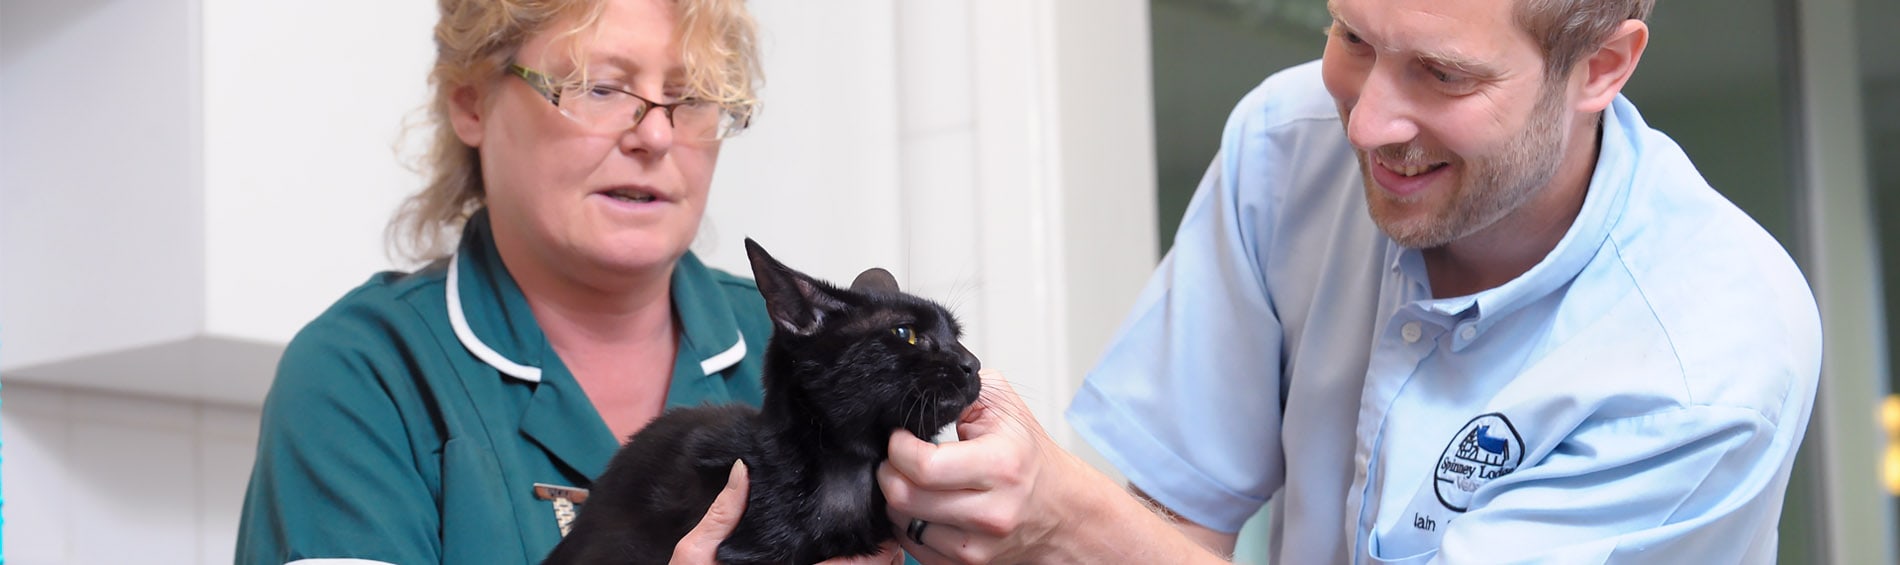 Eye Problems in Cats | Spinney Vets